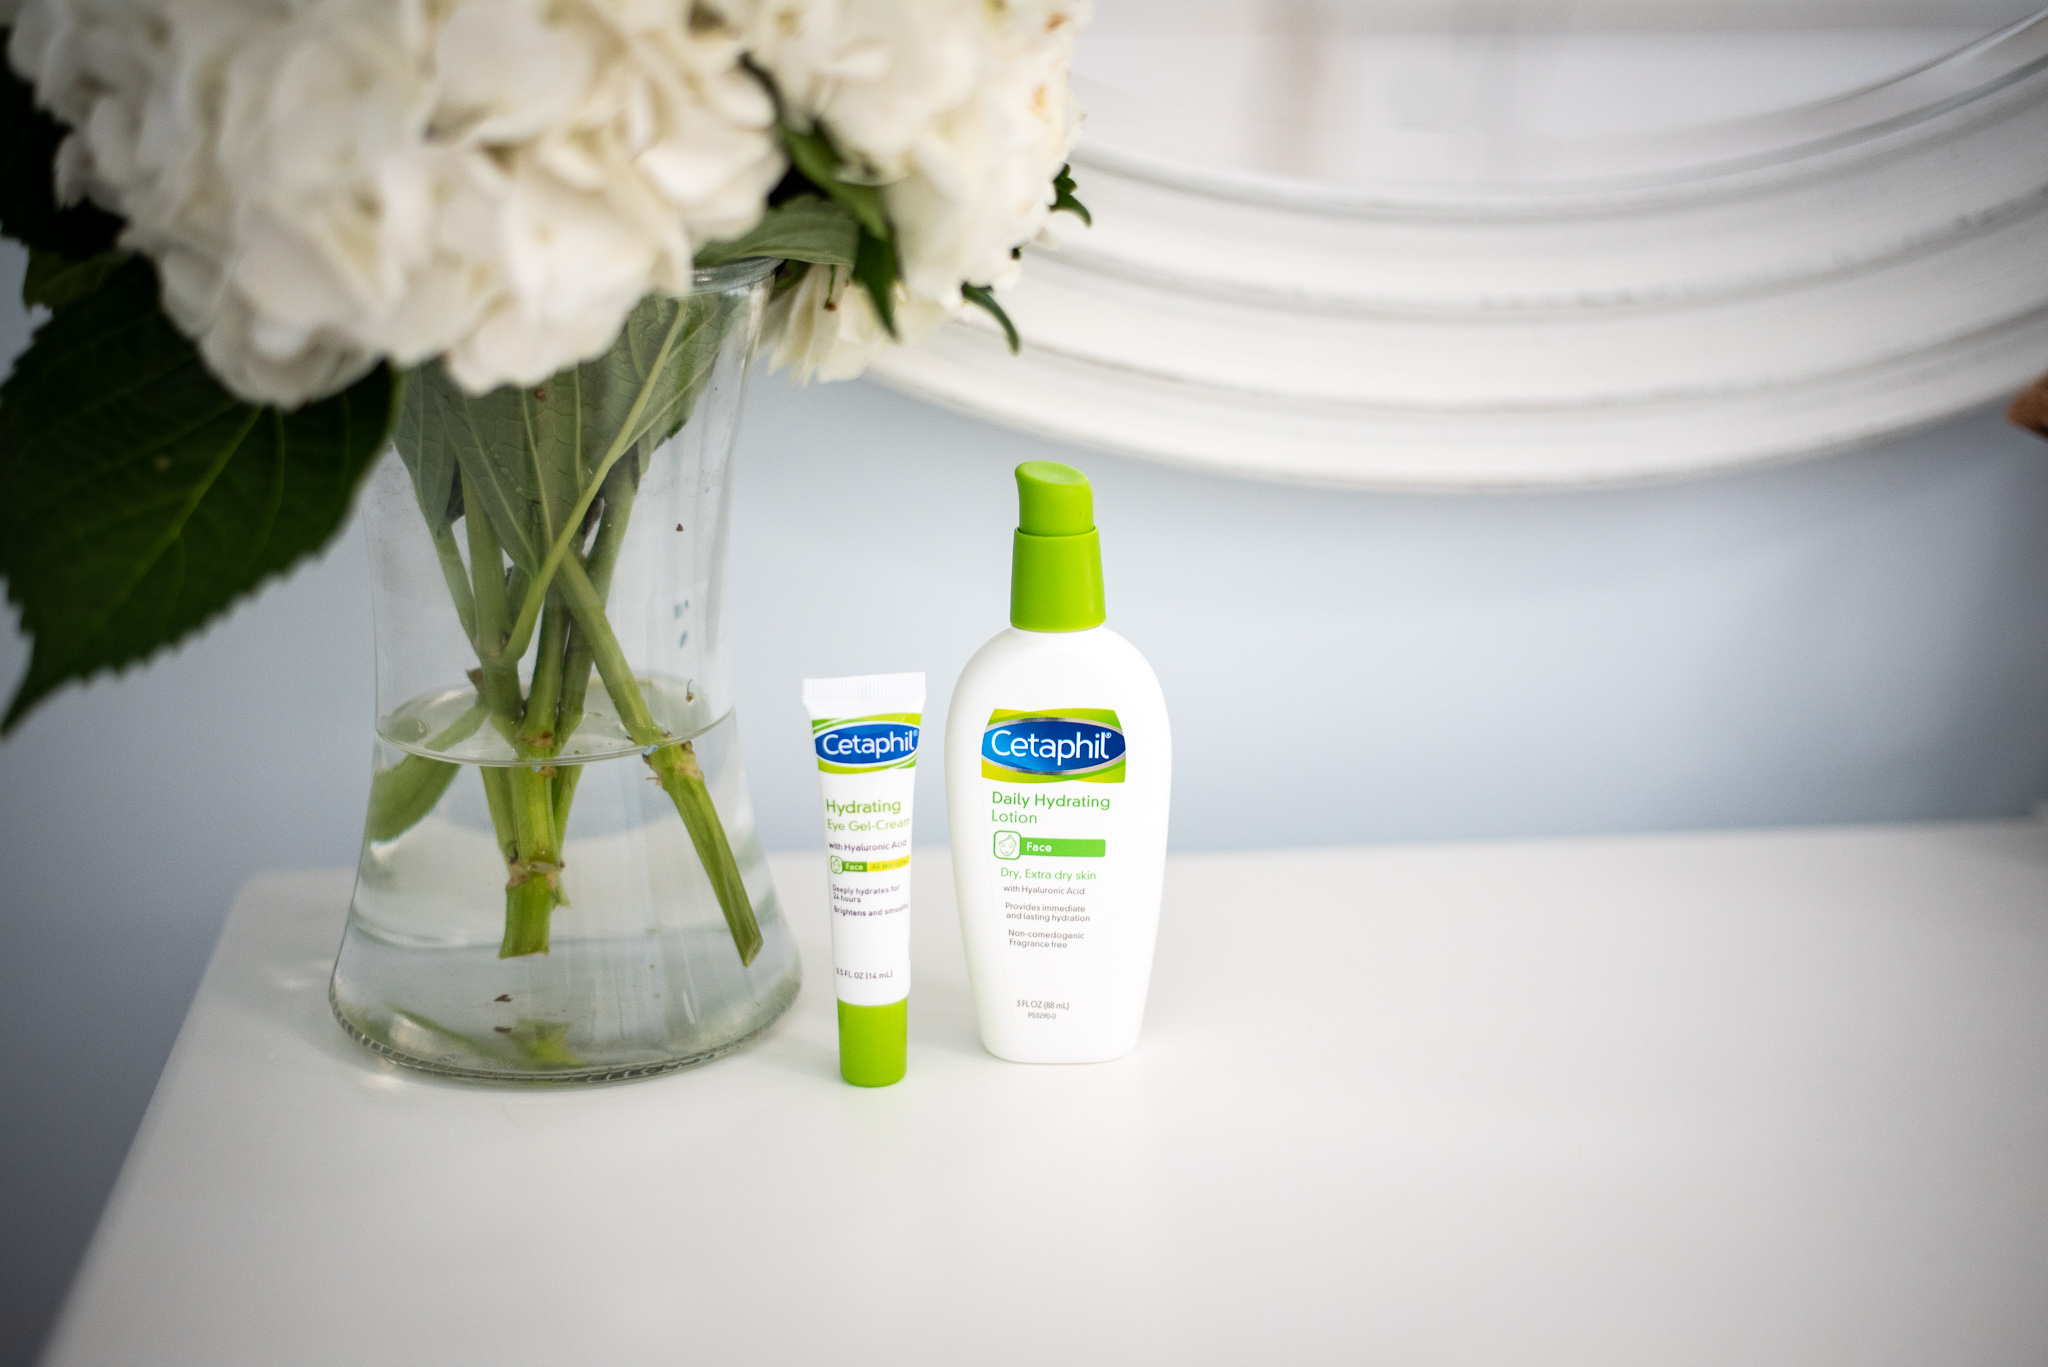 The Best Drugstore Brand I Swear By | Cetaphil Face and Body Cream | featured by popular North Carolina life and style blogger Coffee Beans and Bobby Pins